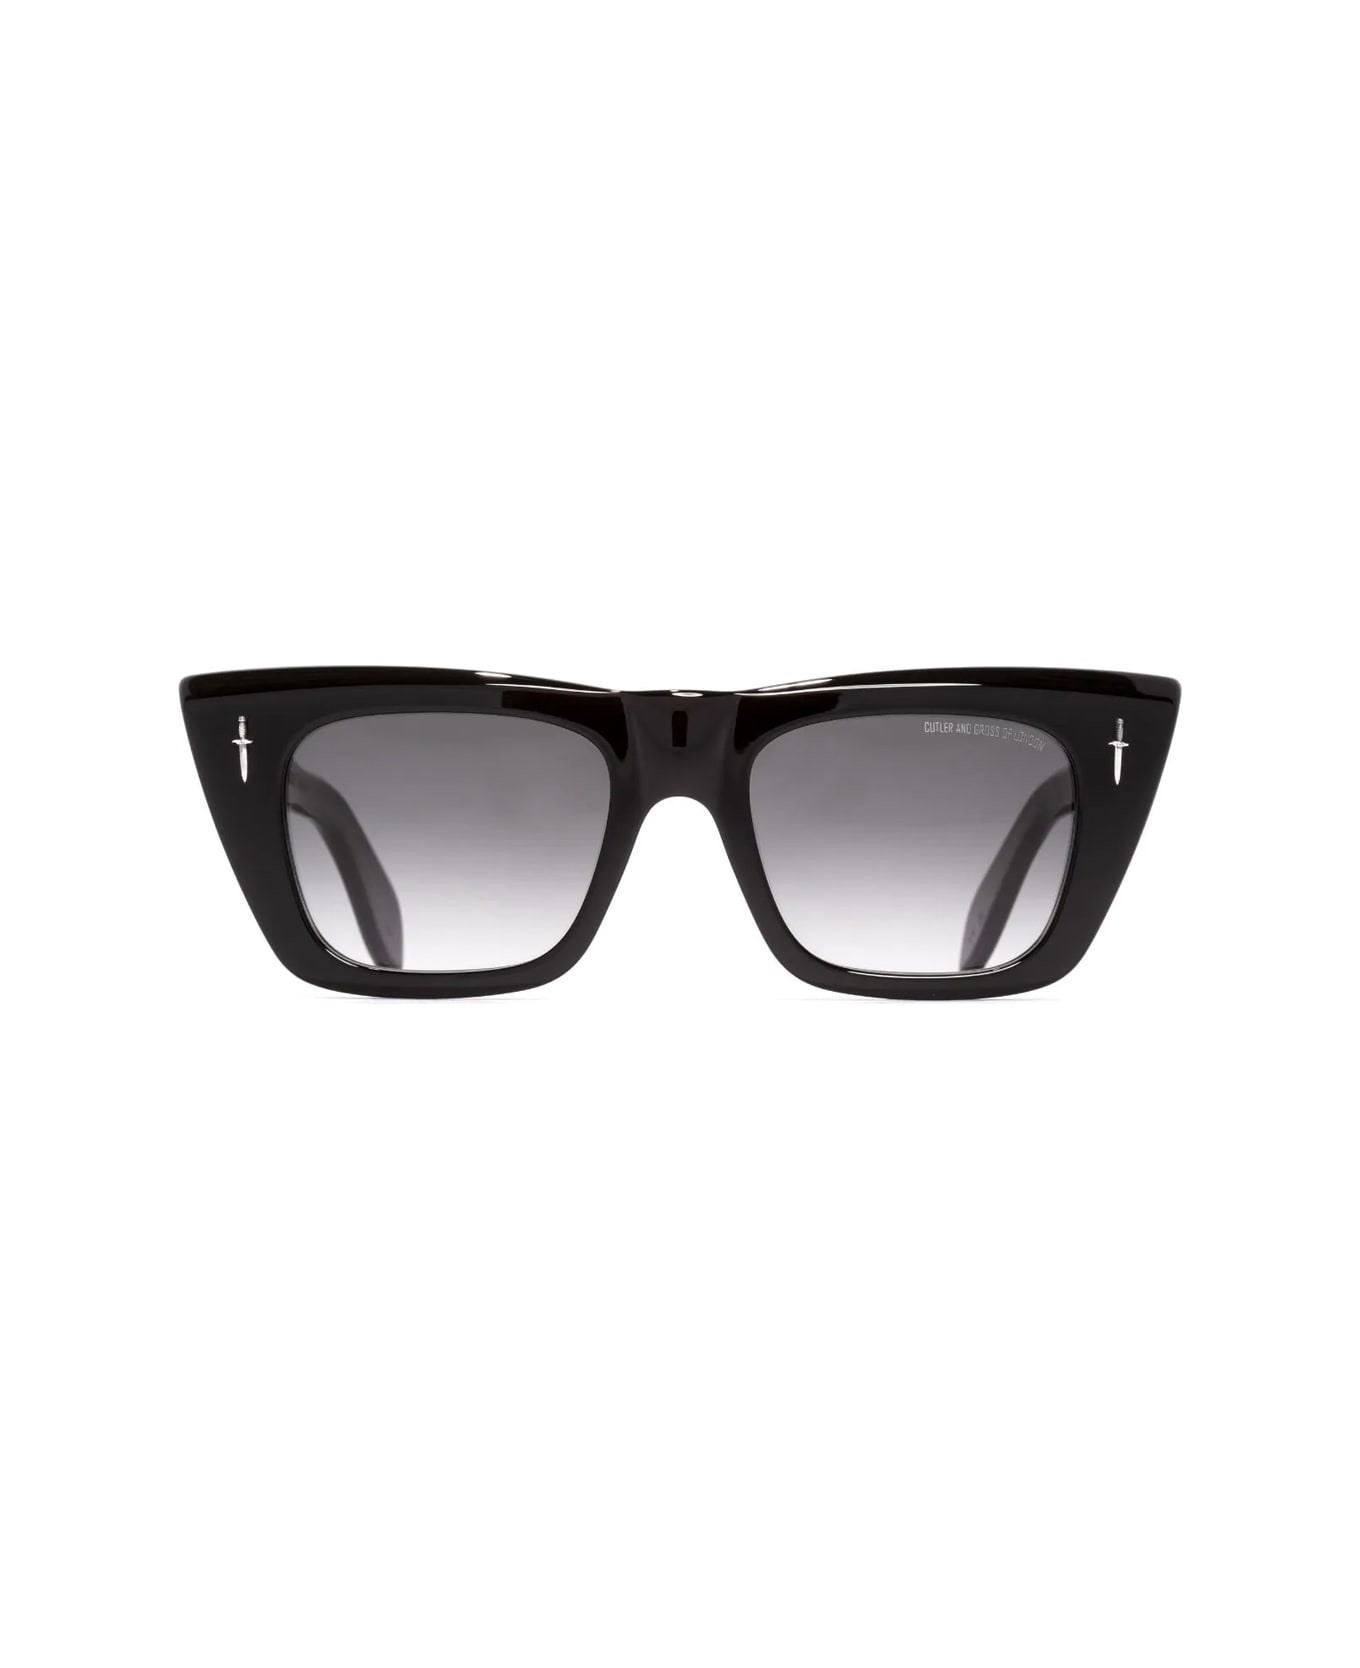 Cutler and Gross Great Frog 008 01 Sunglasses - Nero